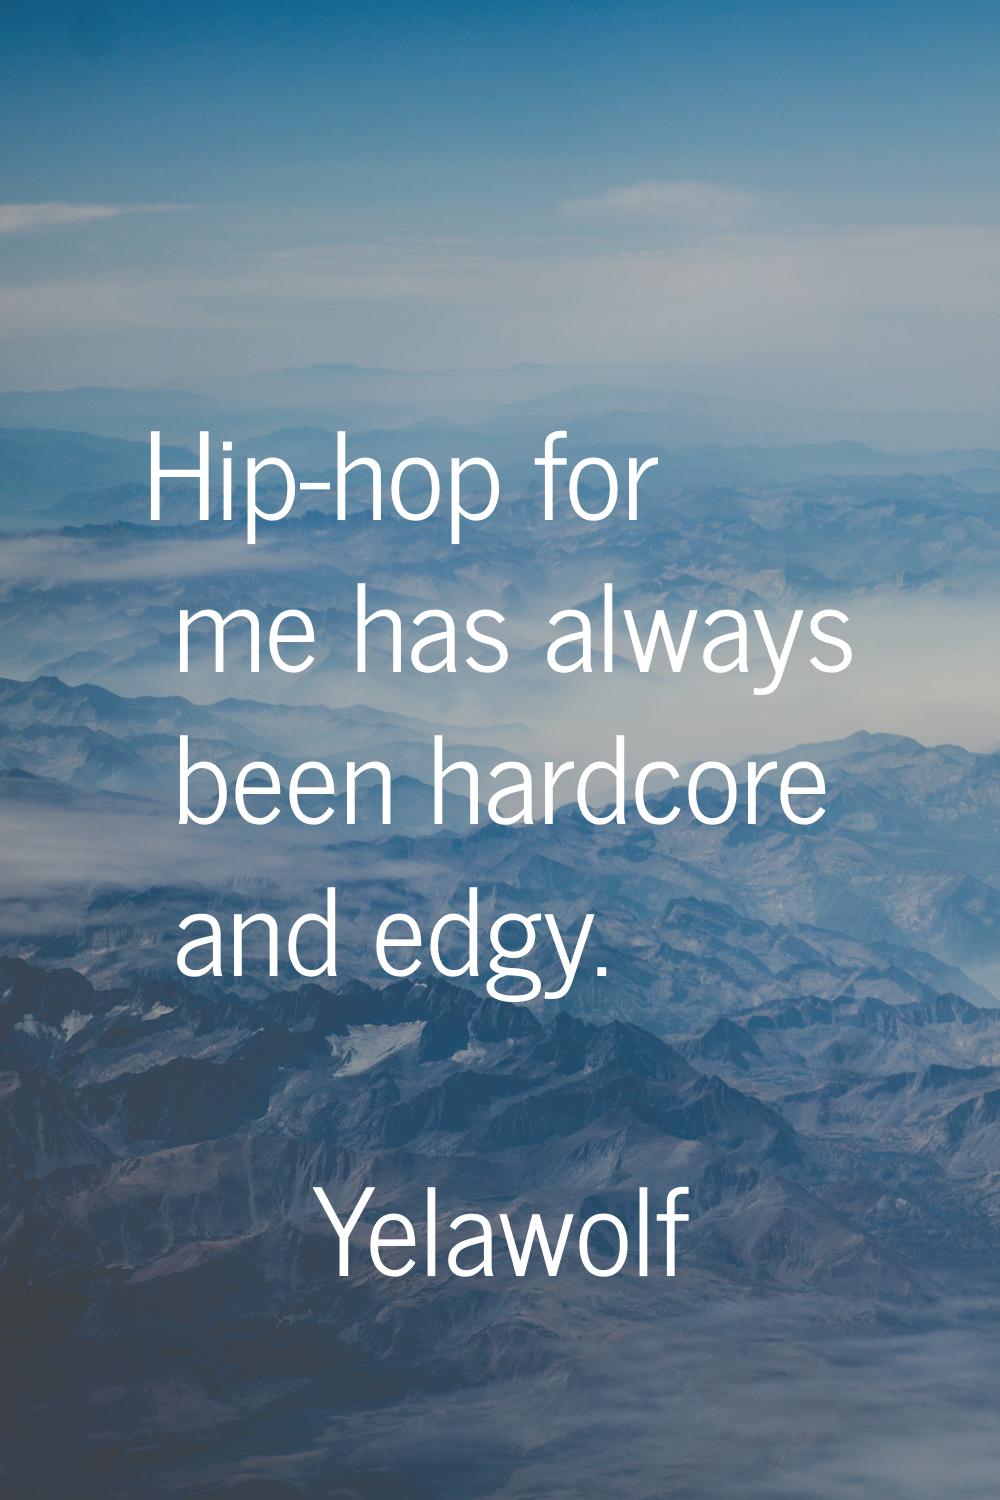 Hip-hop for me has always been hardcore and edgy.